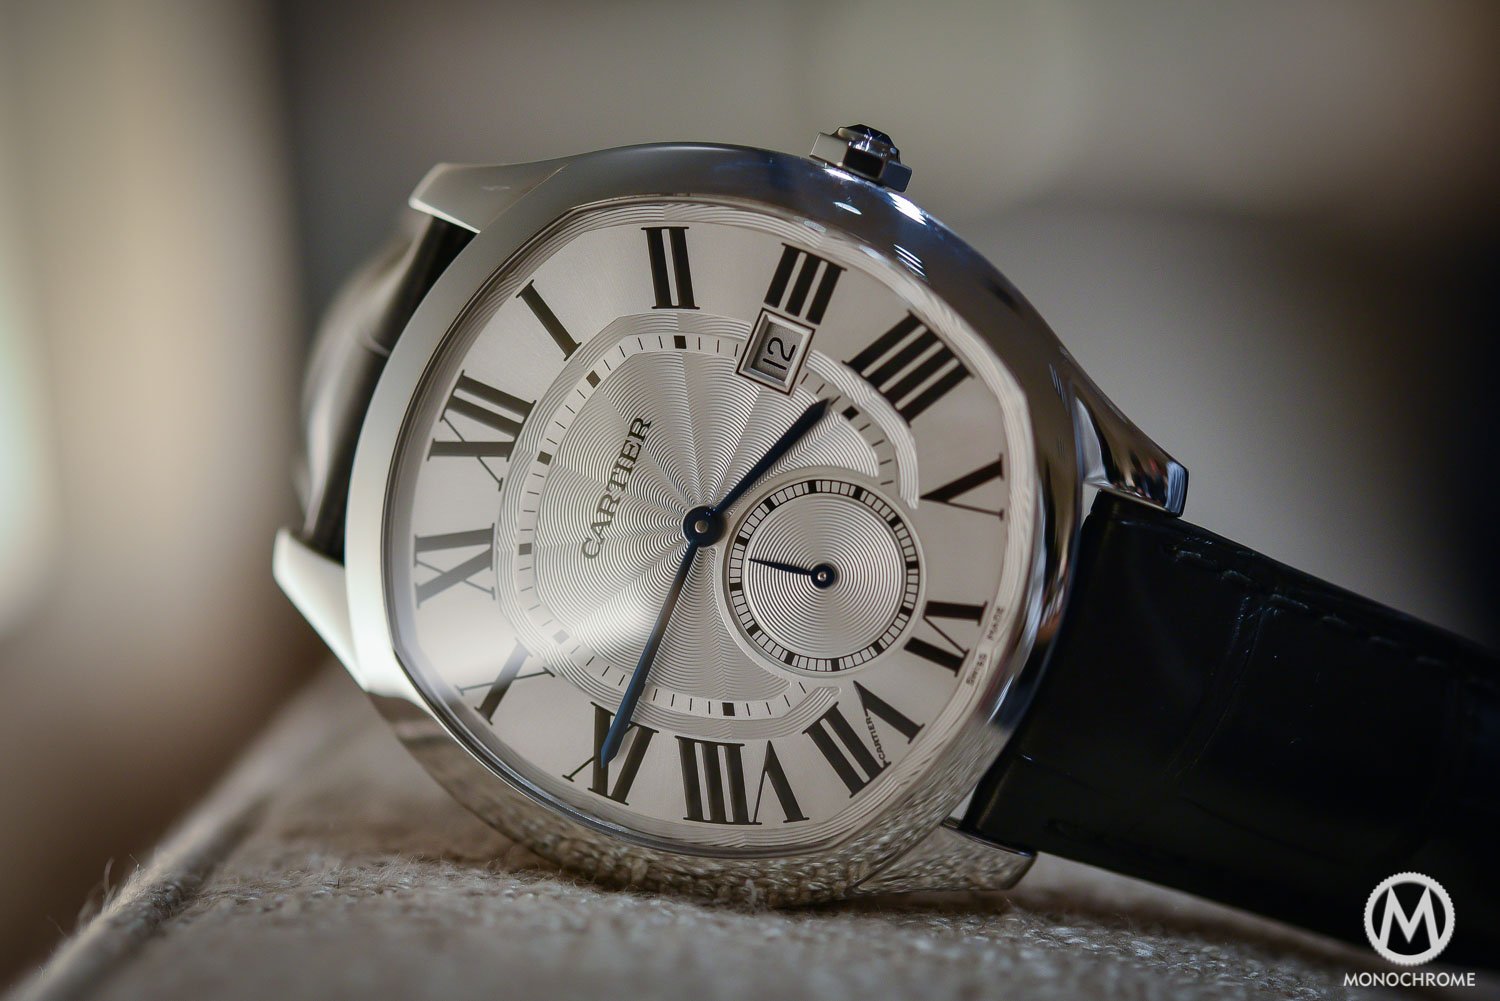 SIHH 2016 - Introducing the Drive de Cartier, a new men's shaped watch  (hands-on review, live photos, price) - Monochrome Watches